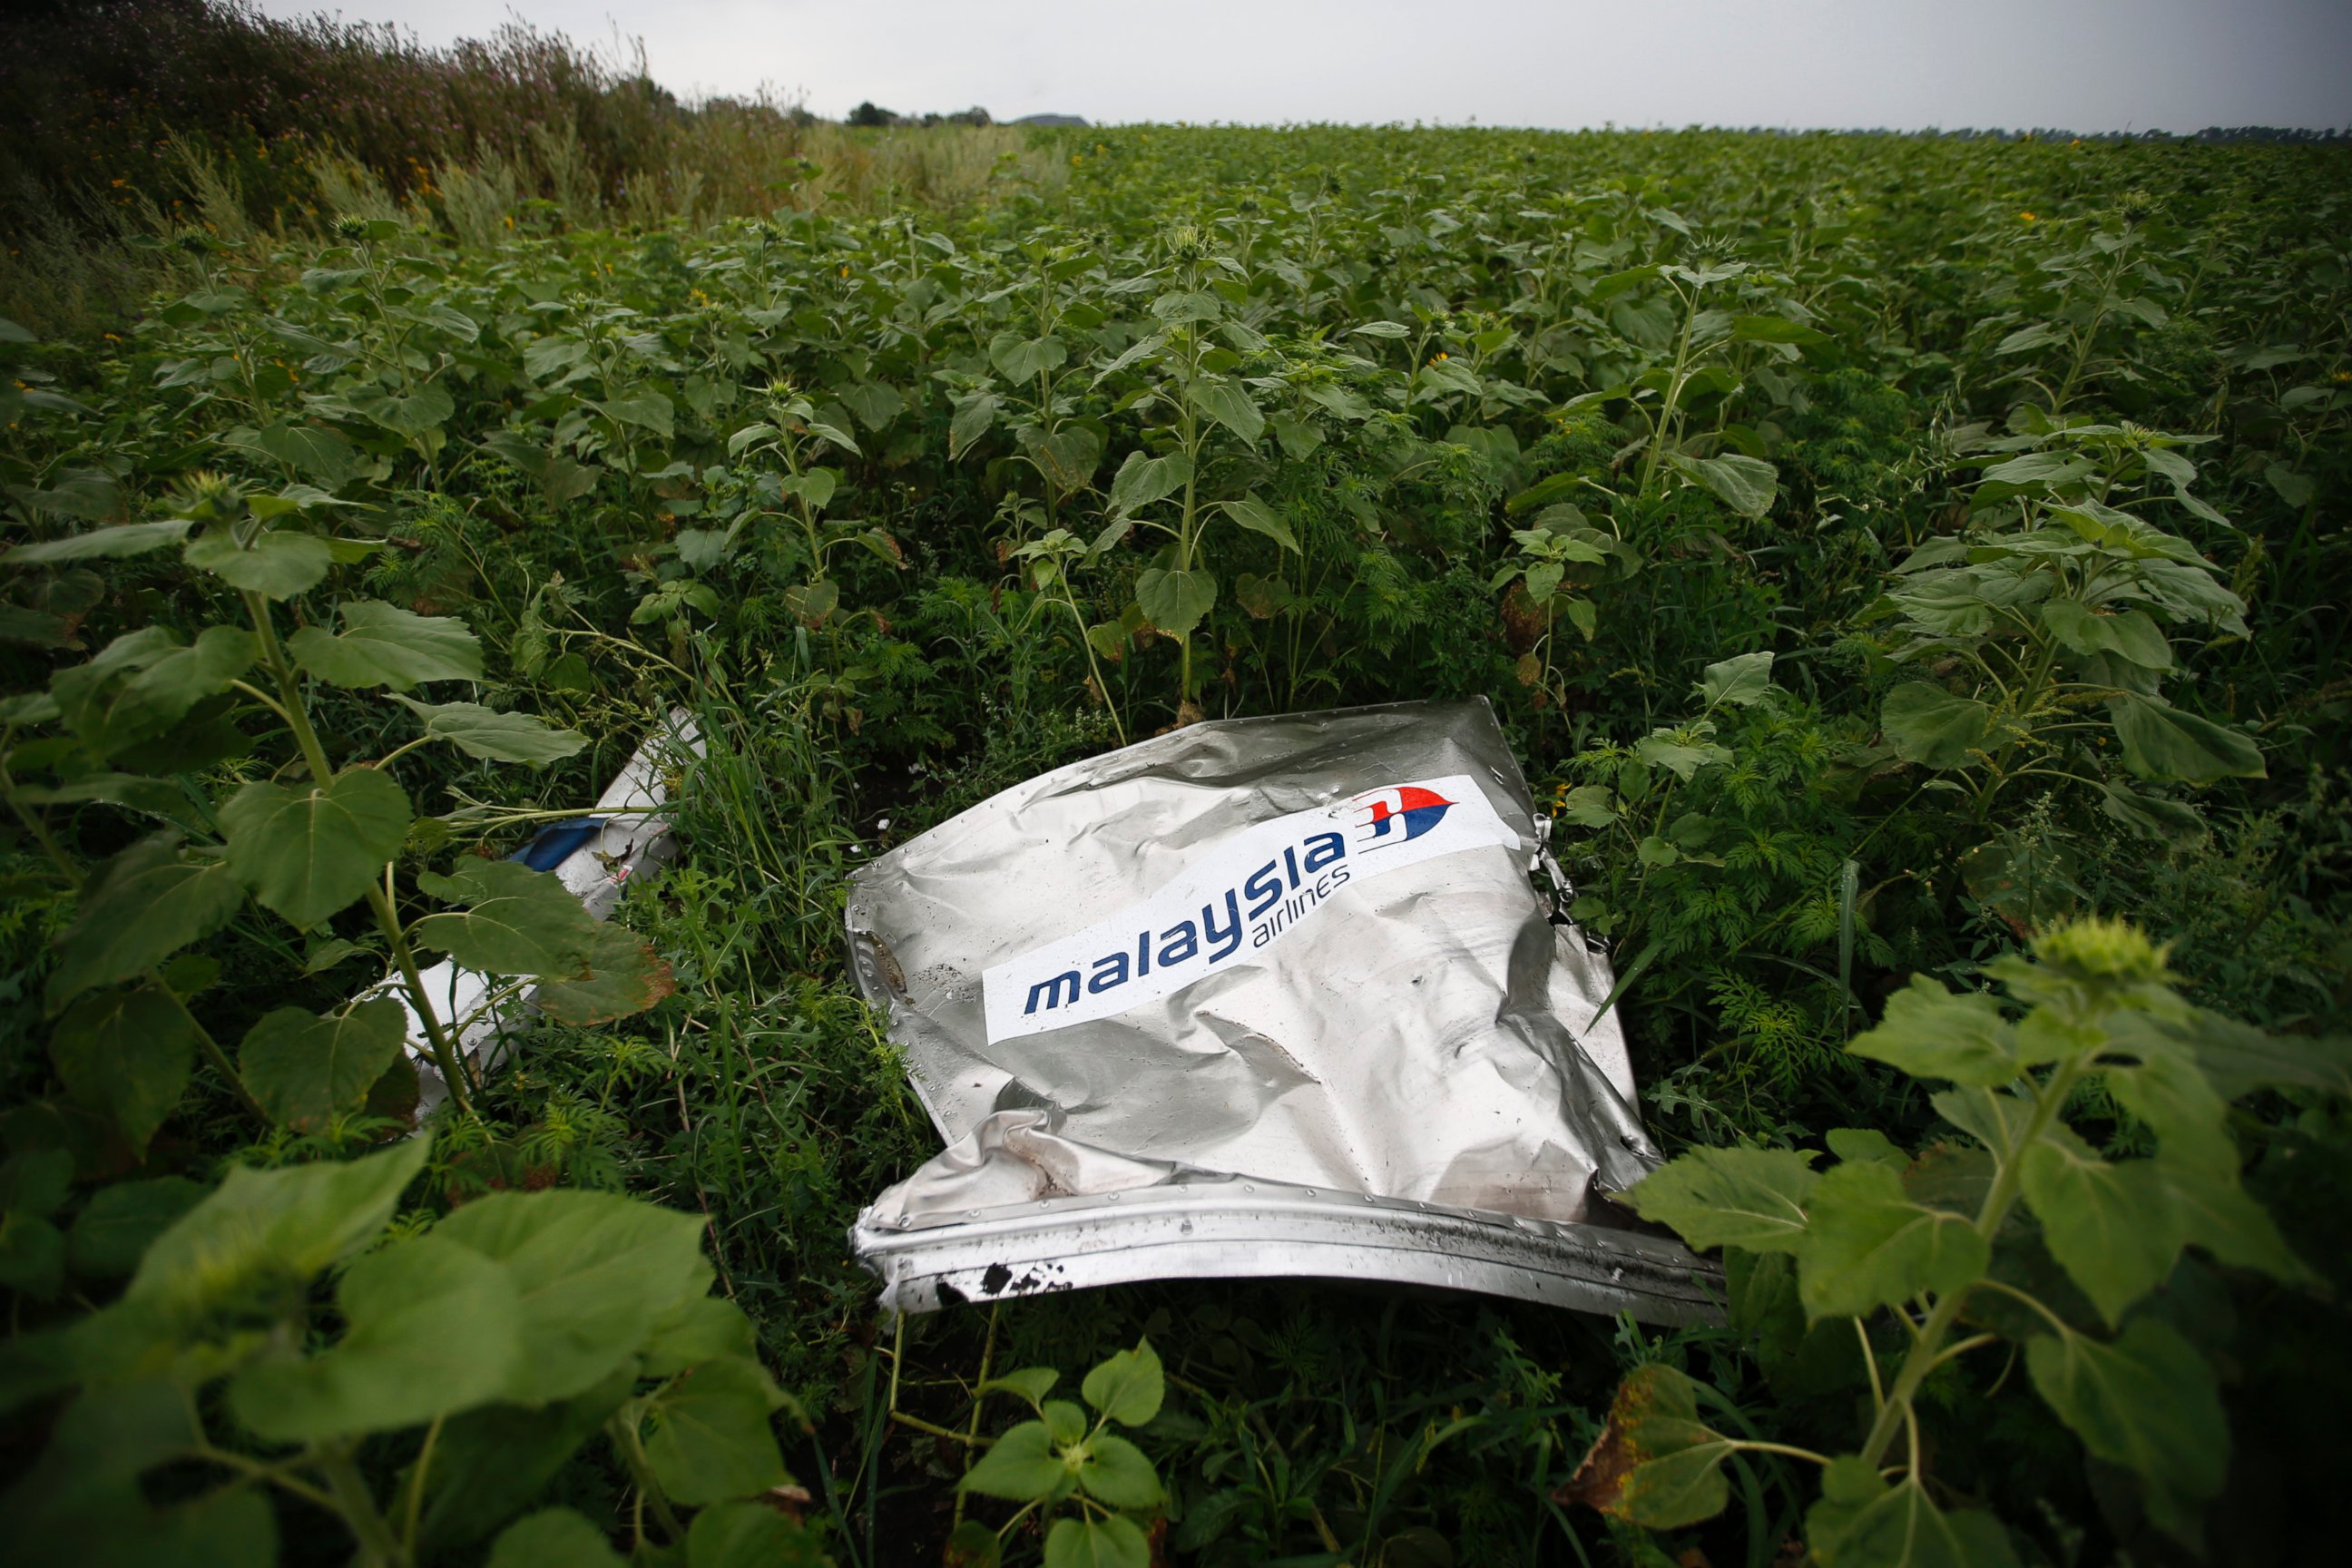 PHOTO: Debris from Malaysia Airlines Flight 17 is pictured near the village of Rozsypne, in the Donetsk region of Ukraine, on July 18, 2014.
